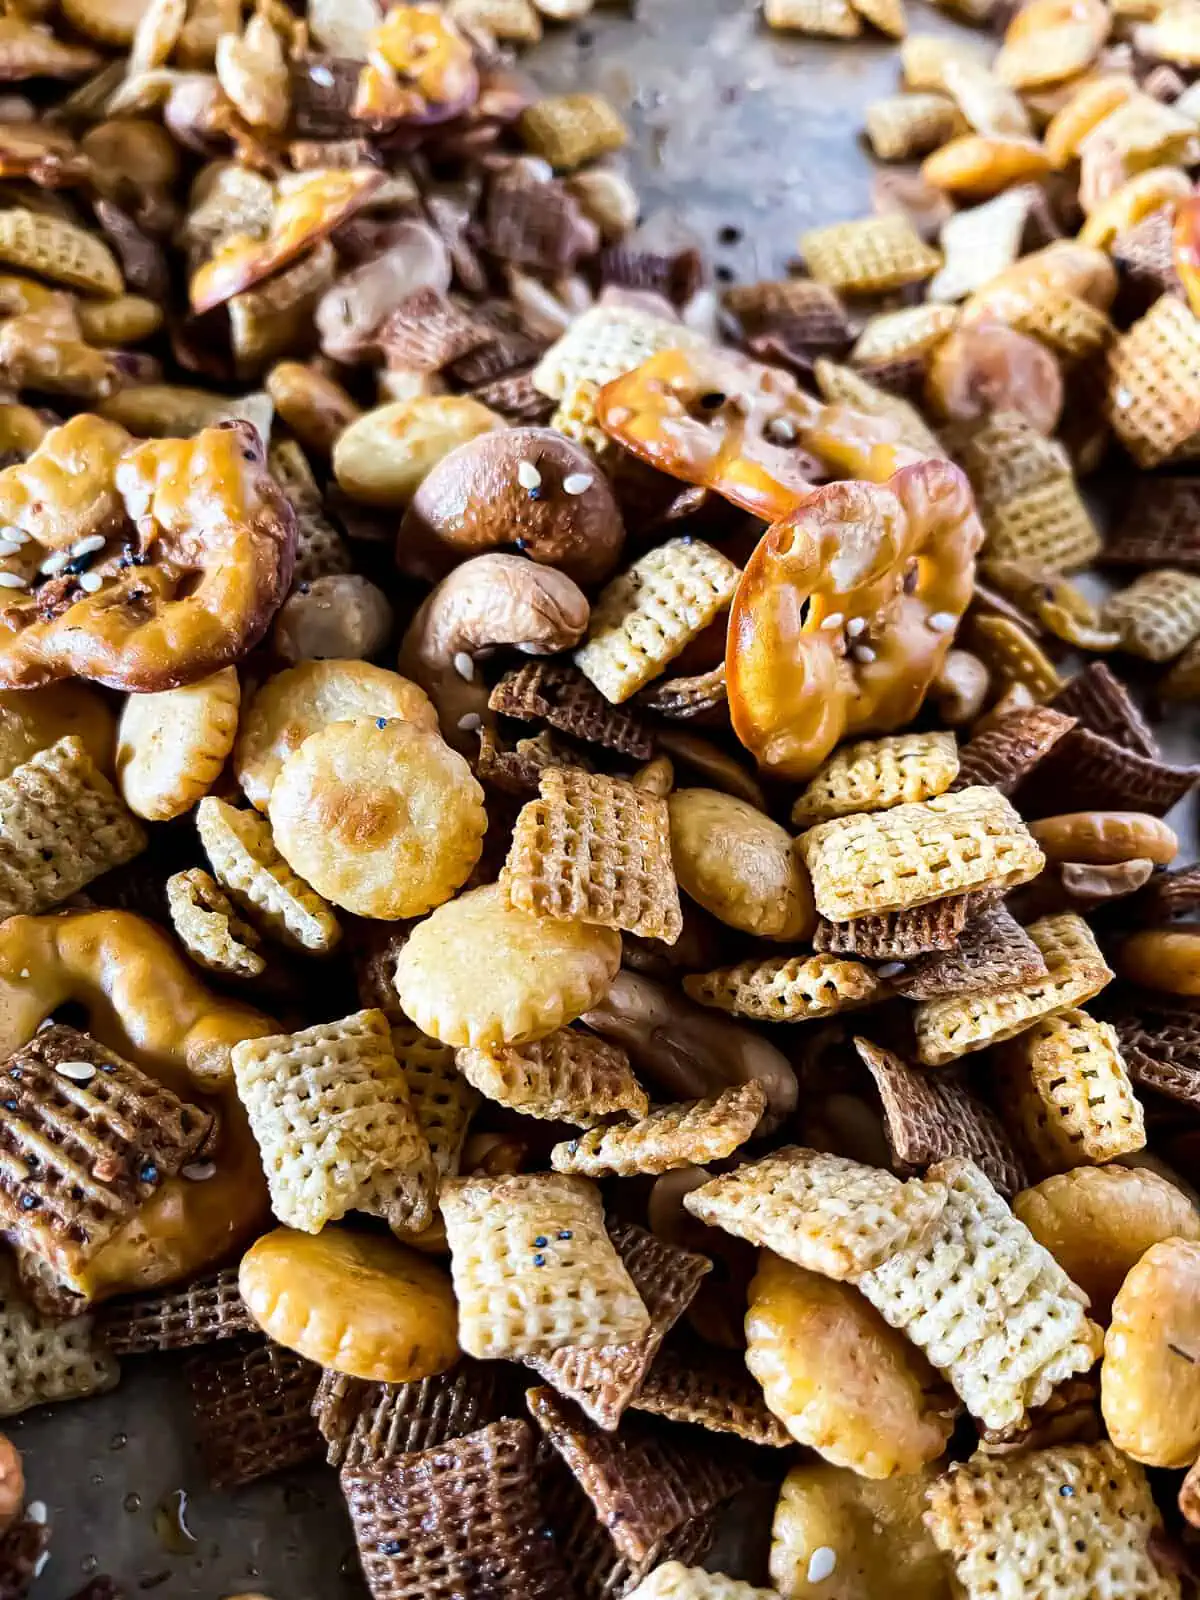 Up close picture of savory snack mix recipe with pretzels, cereal, nuts, and oyster crackers